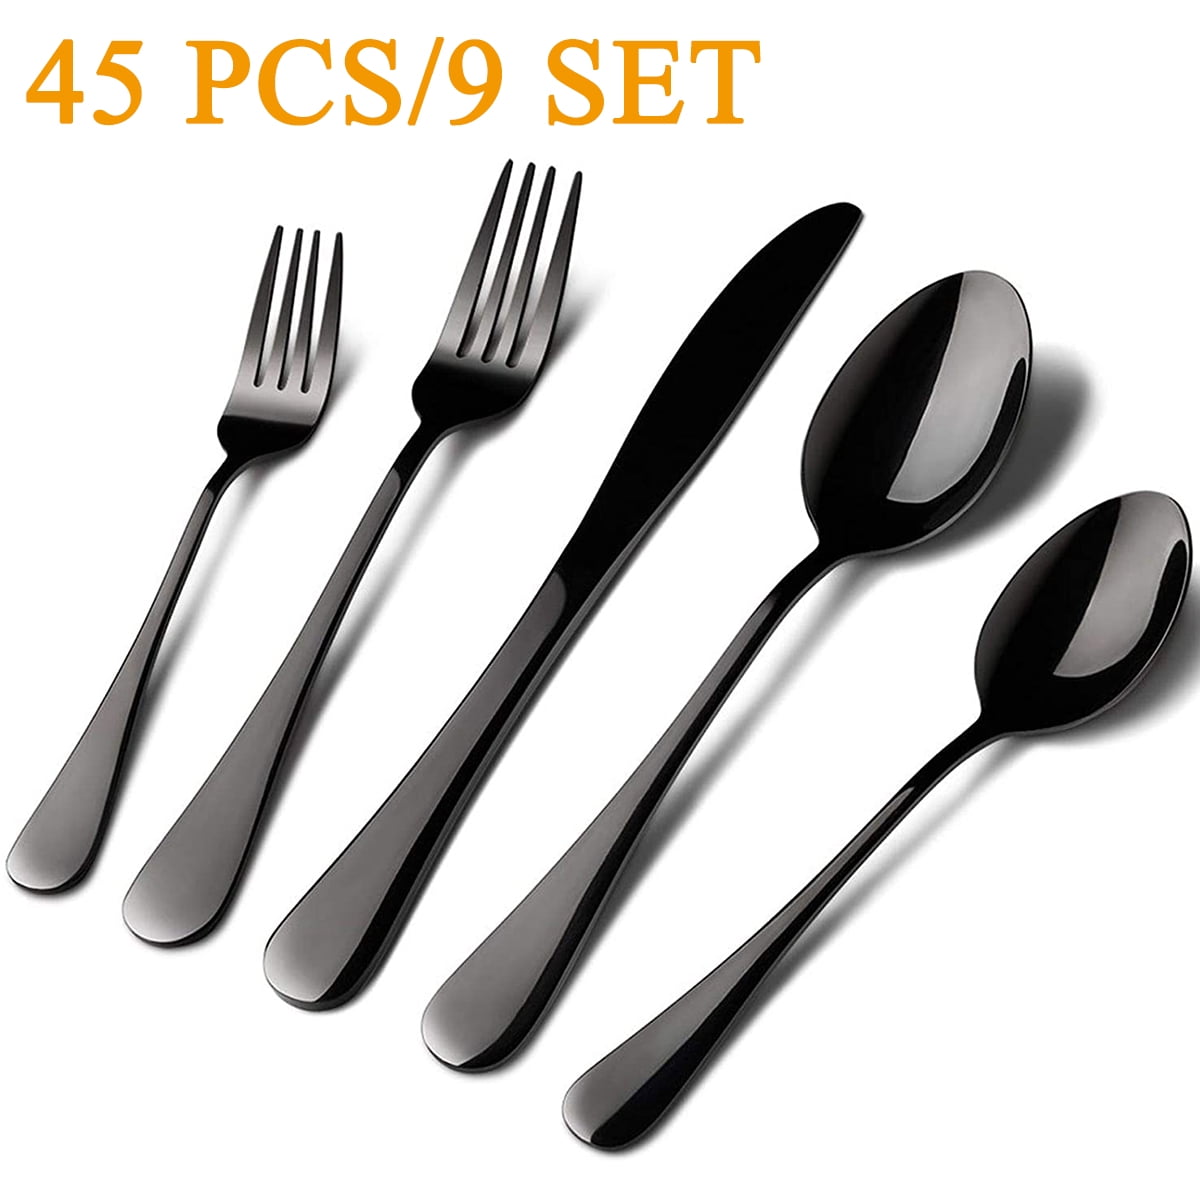 Include Knife/Fork/Spoon Utensils Service for 9 45-Piece Stainless Steel Flatware Cutlery Set